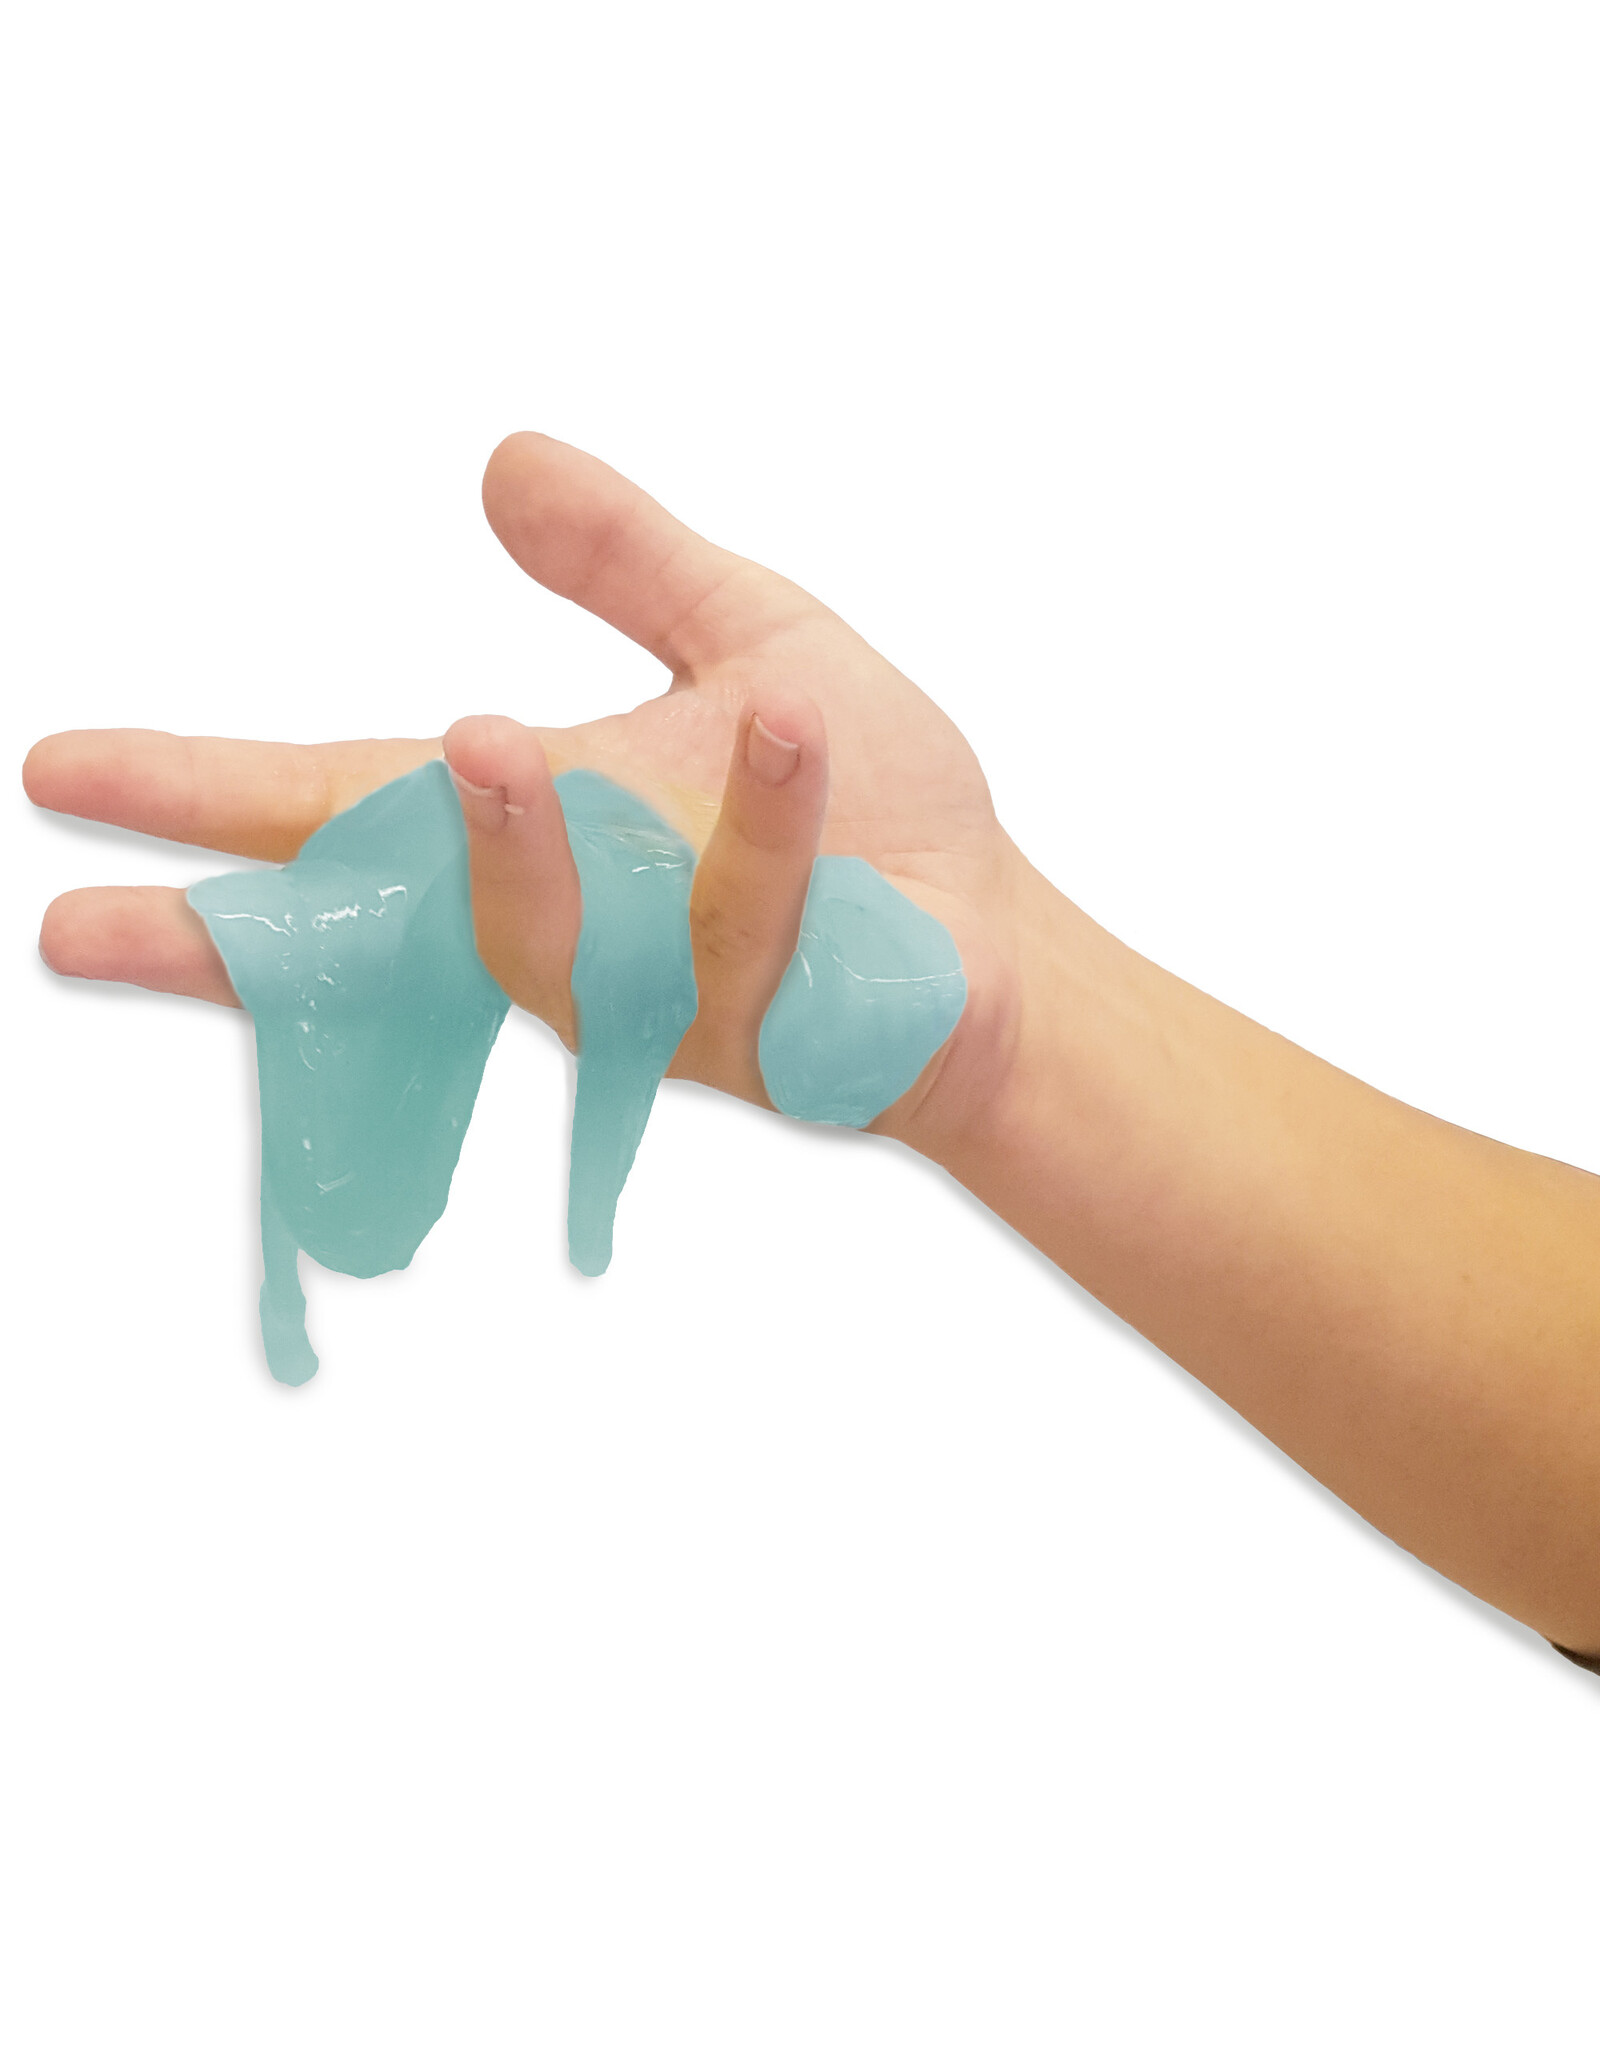 SES Creative SES Slime Marble - Green and blue 200gr